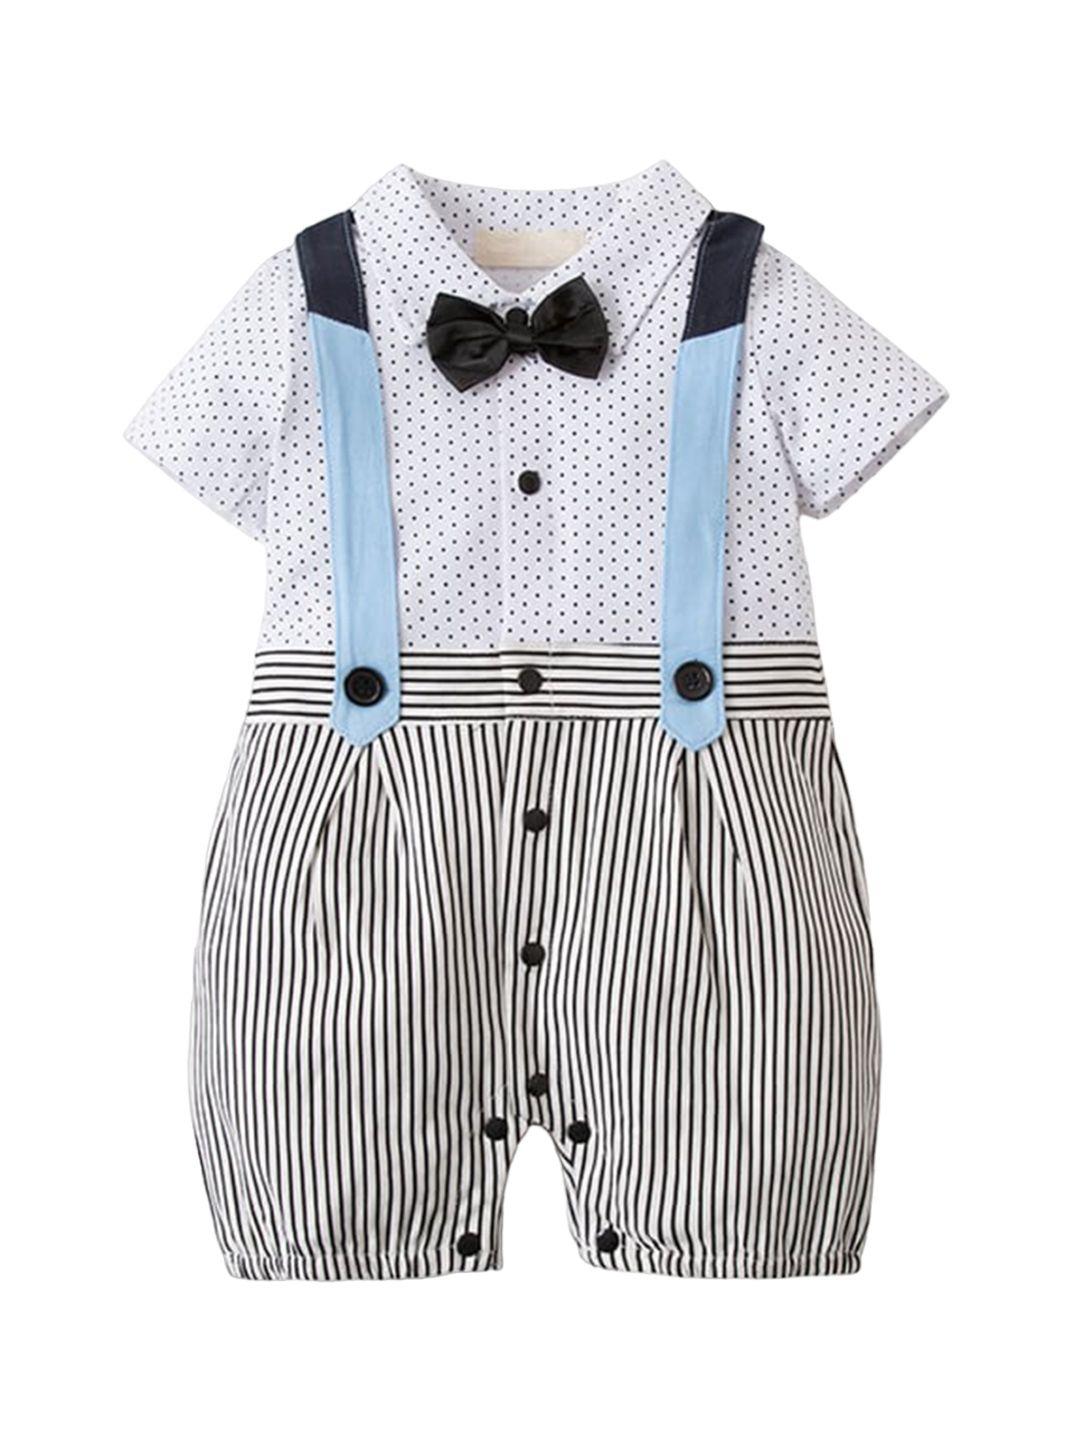 stylecast infant boys black & white striped cotton rompers